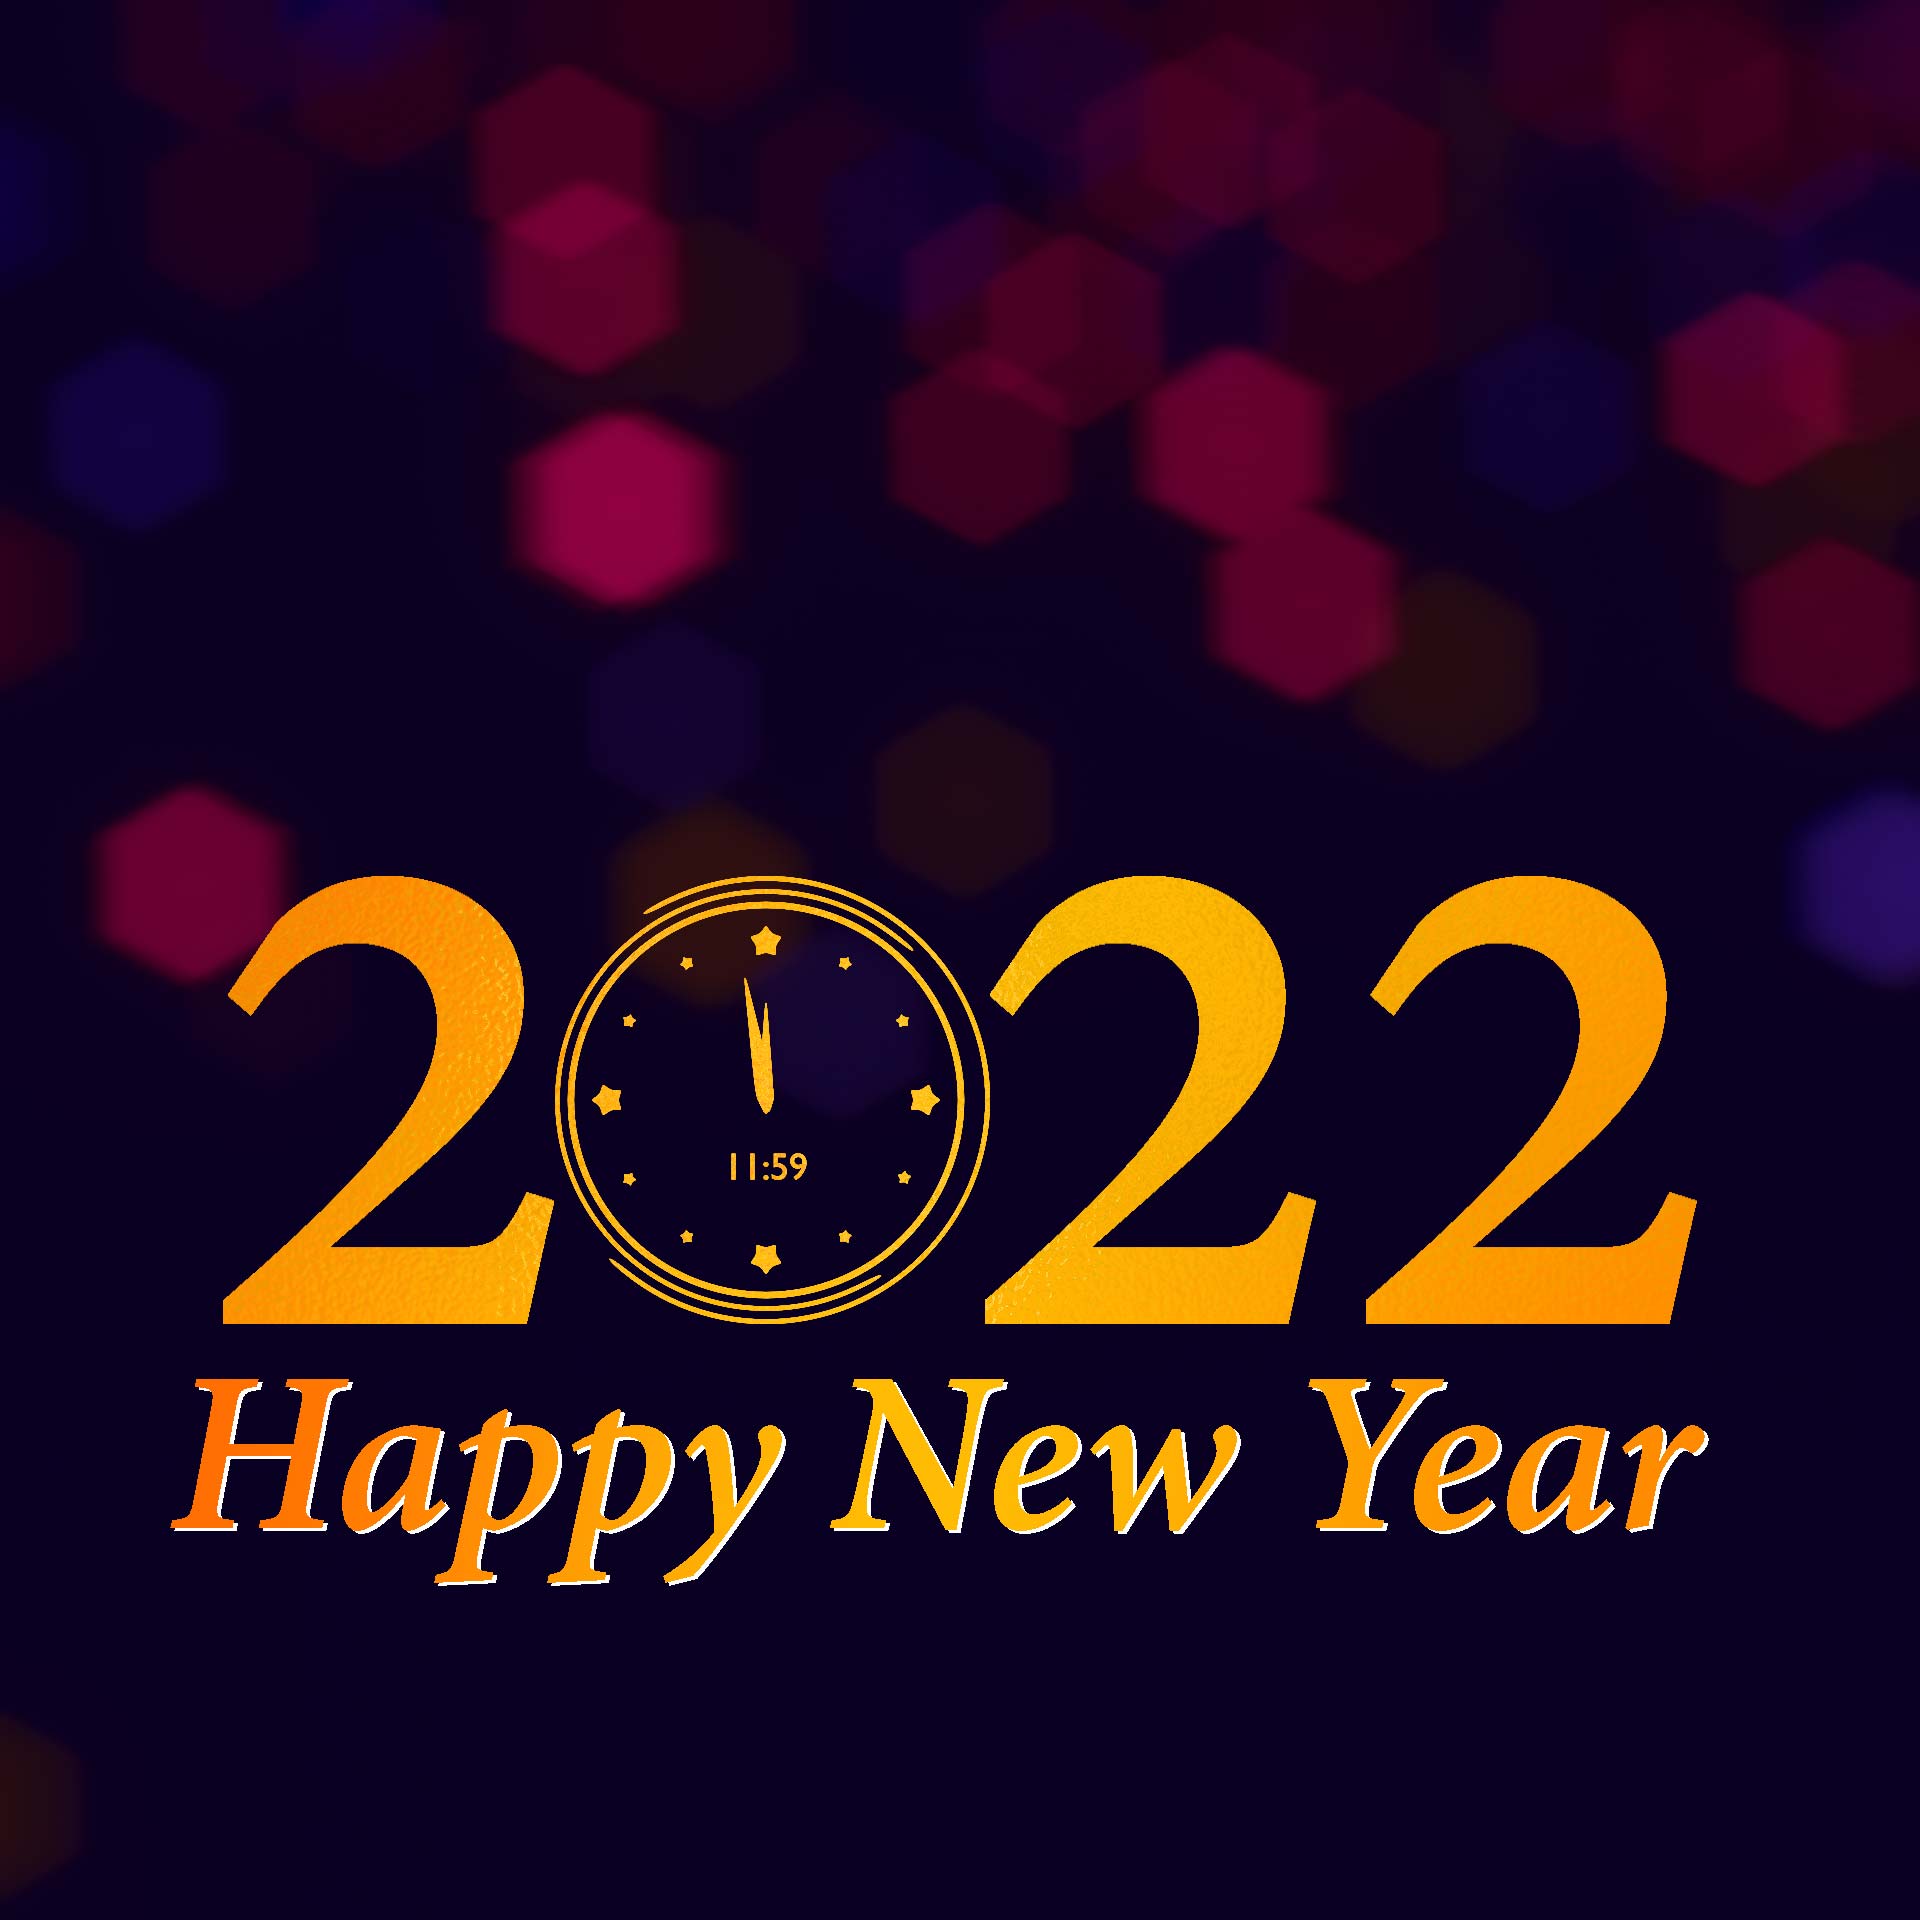 New Year 2022 Wishes Photo Free Download